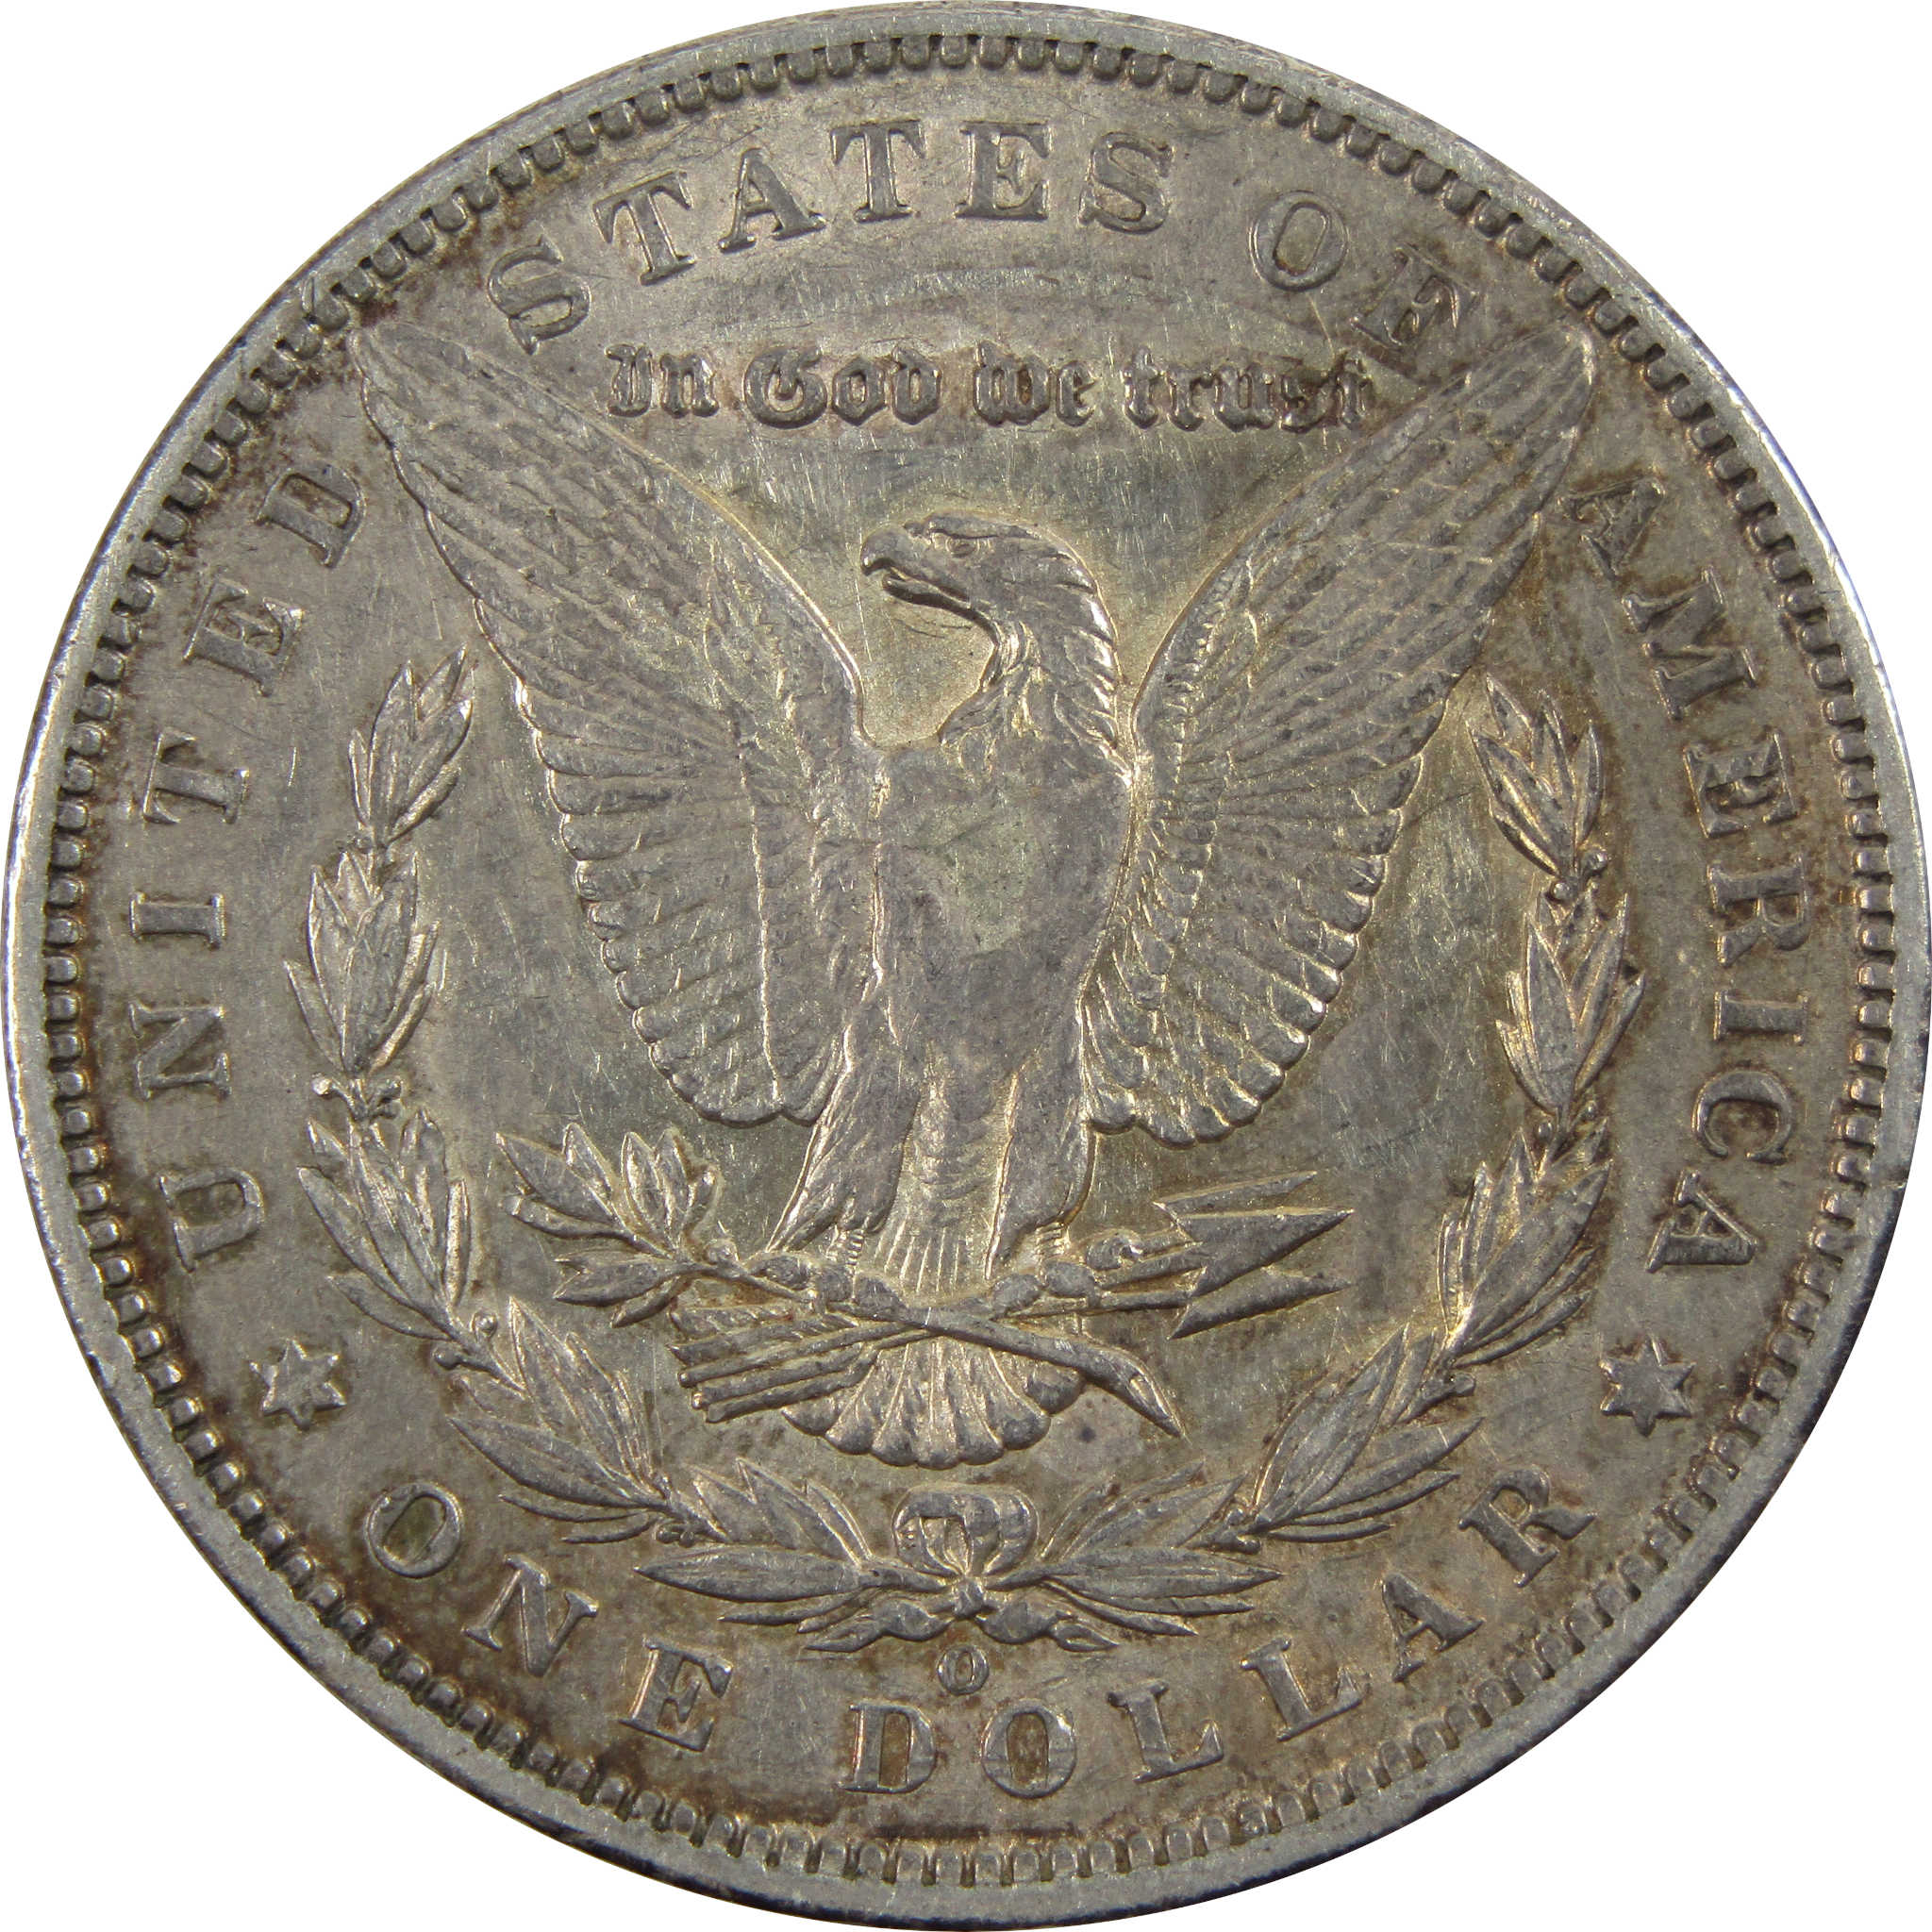 1892 O Morgan Dollar XF EF Extremely Fine 90% Silver $1 Coin SKU:I3967 - Morgan coin - Morgan silver dollar - Morgan silver dollar for sale - Profile Coins &amp; Collectibles